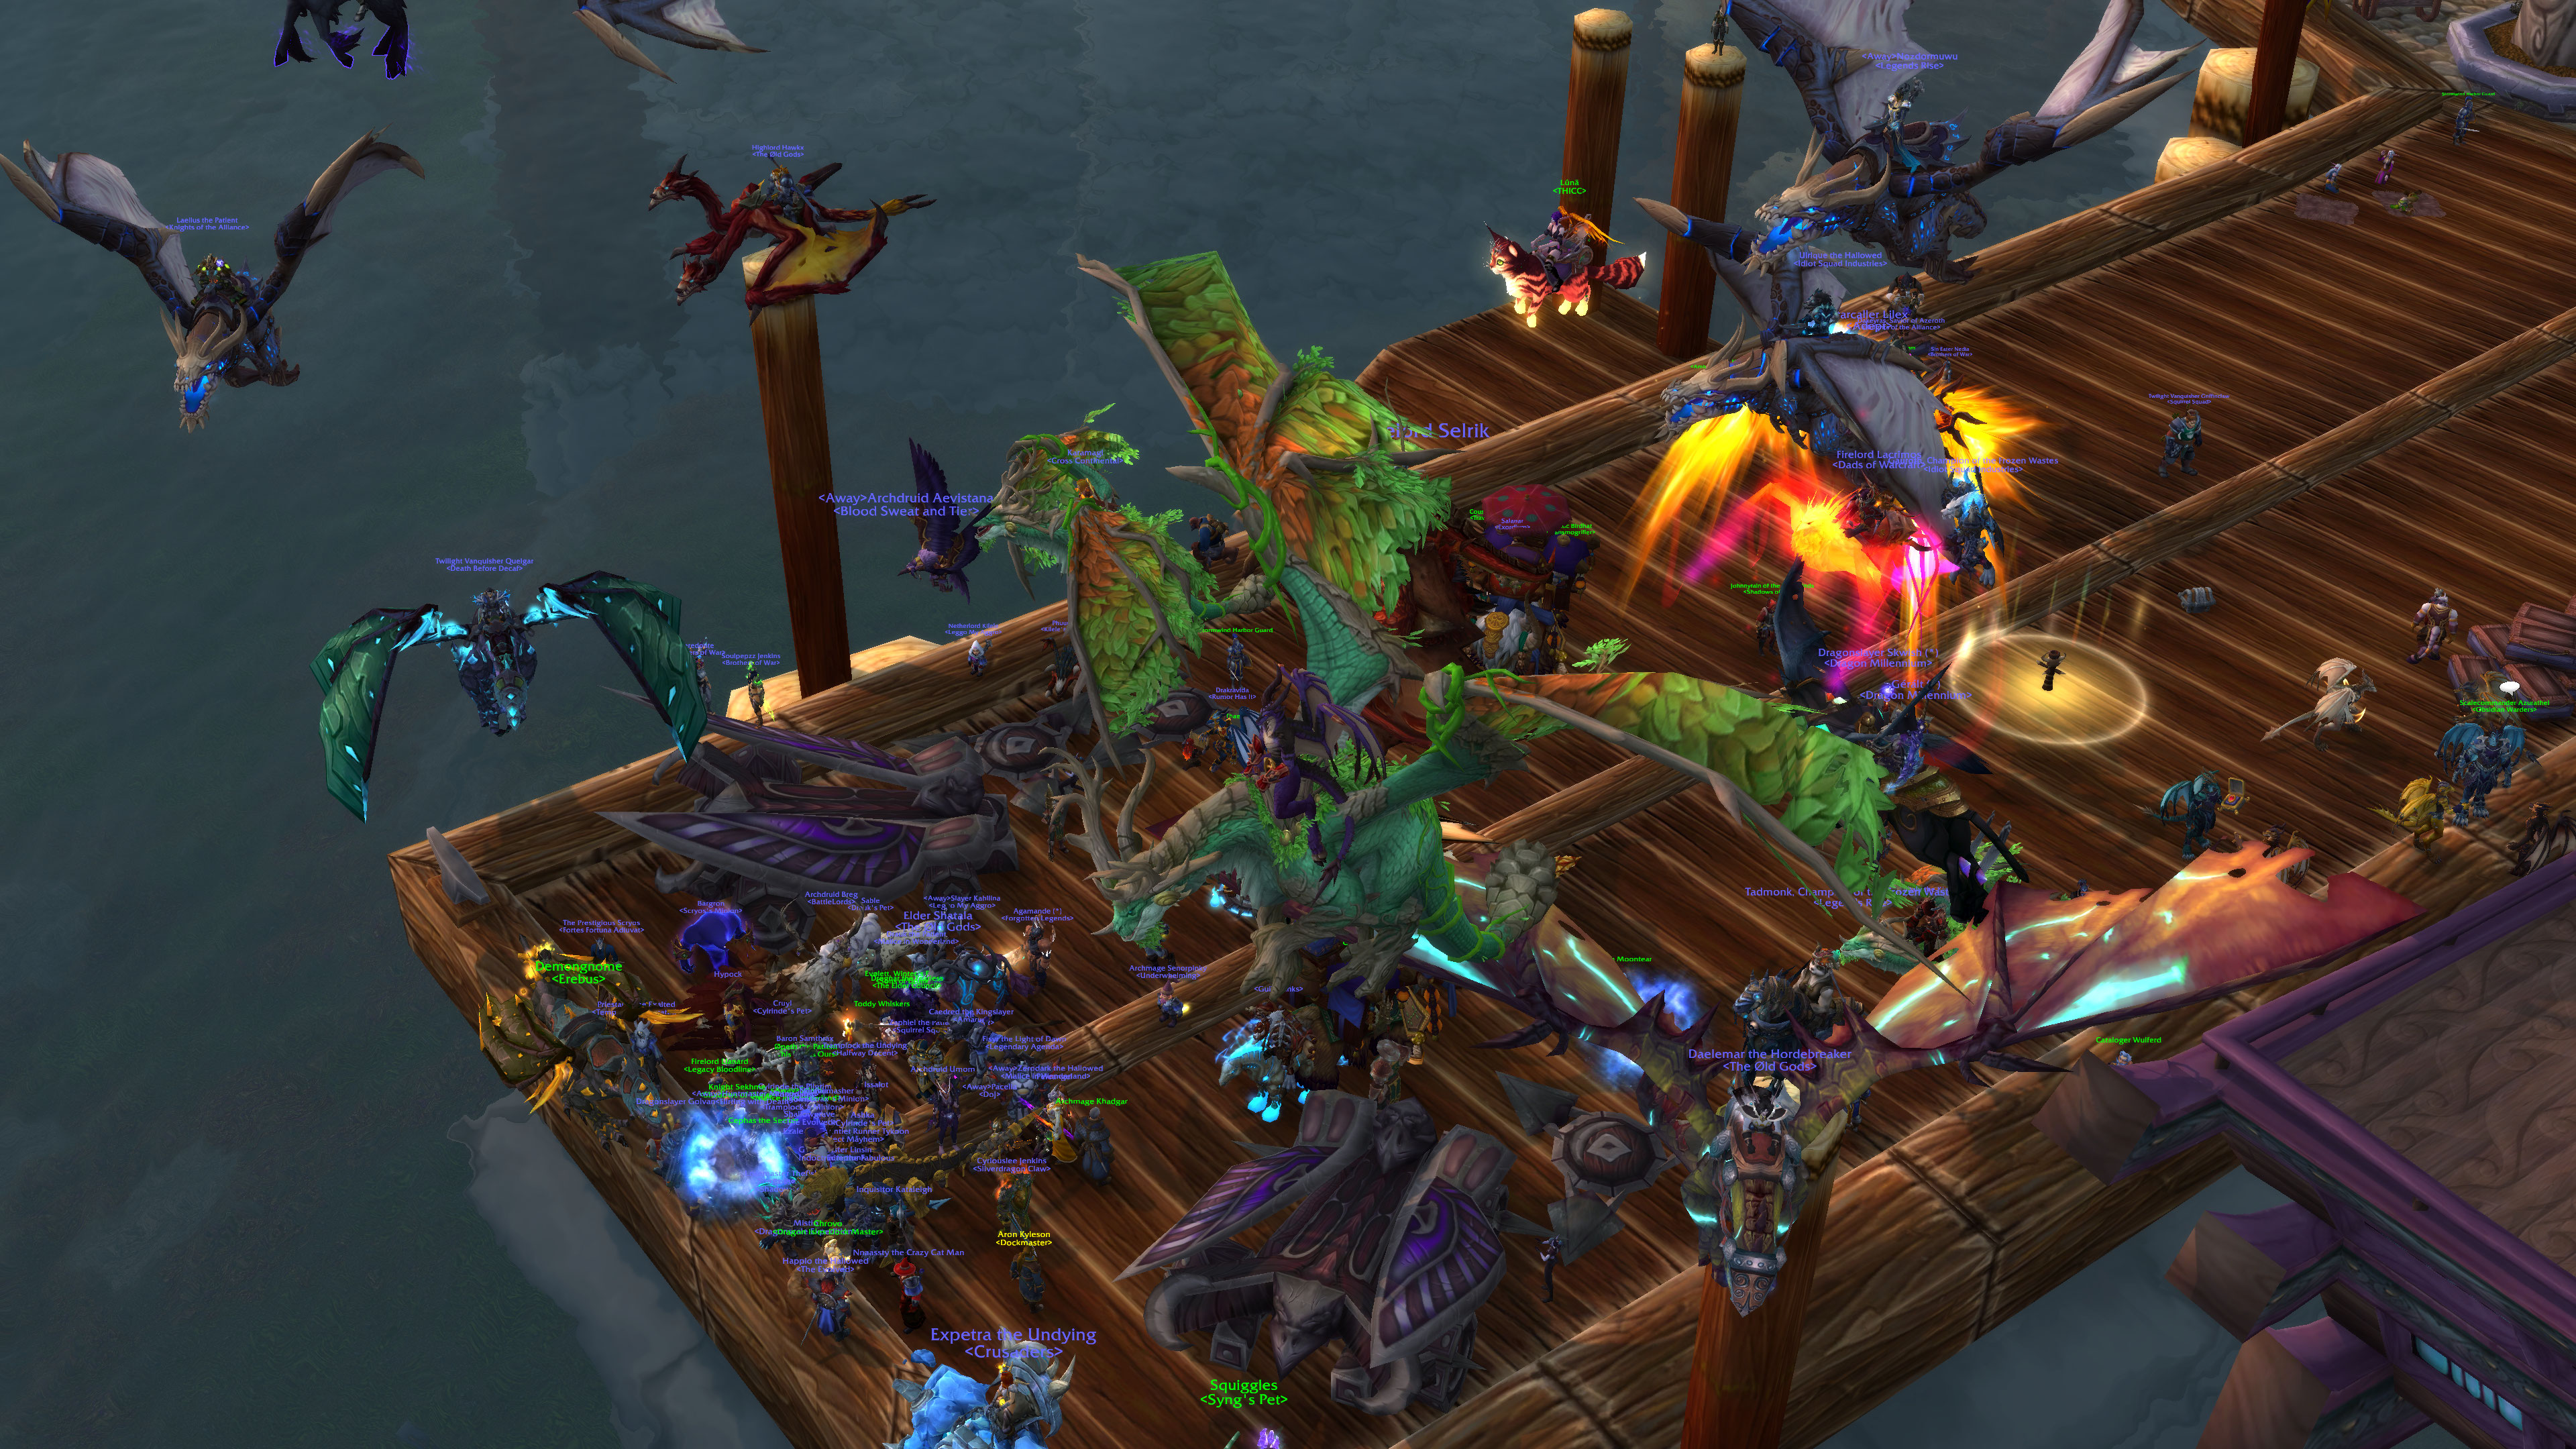 WoW: Dragonflight players wait for the boat to the new zone.